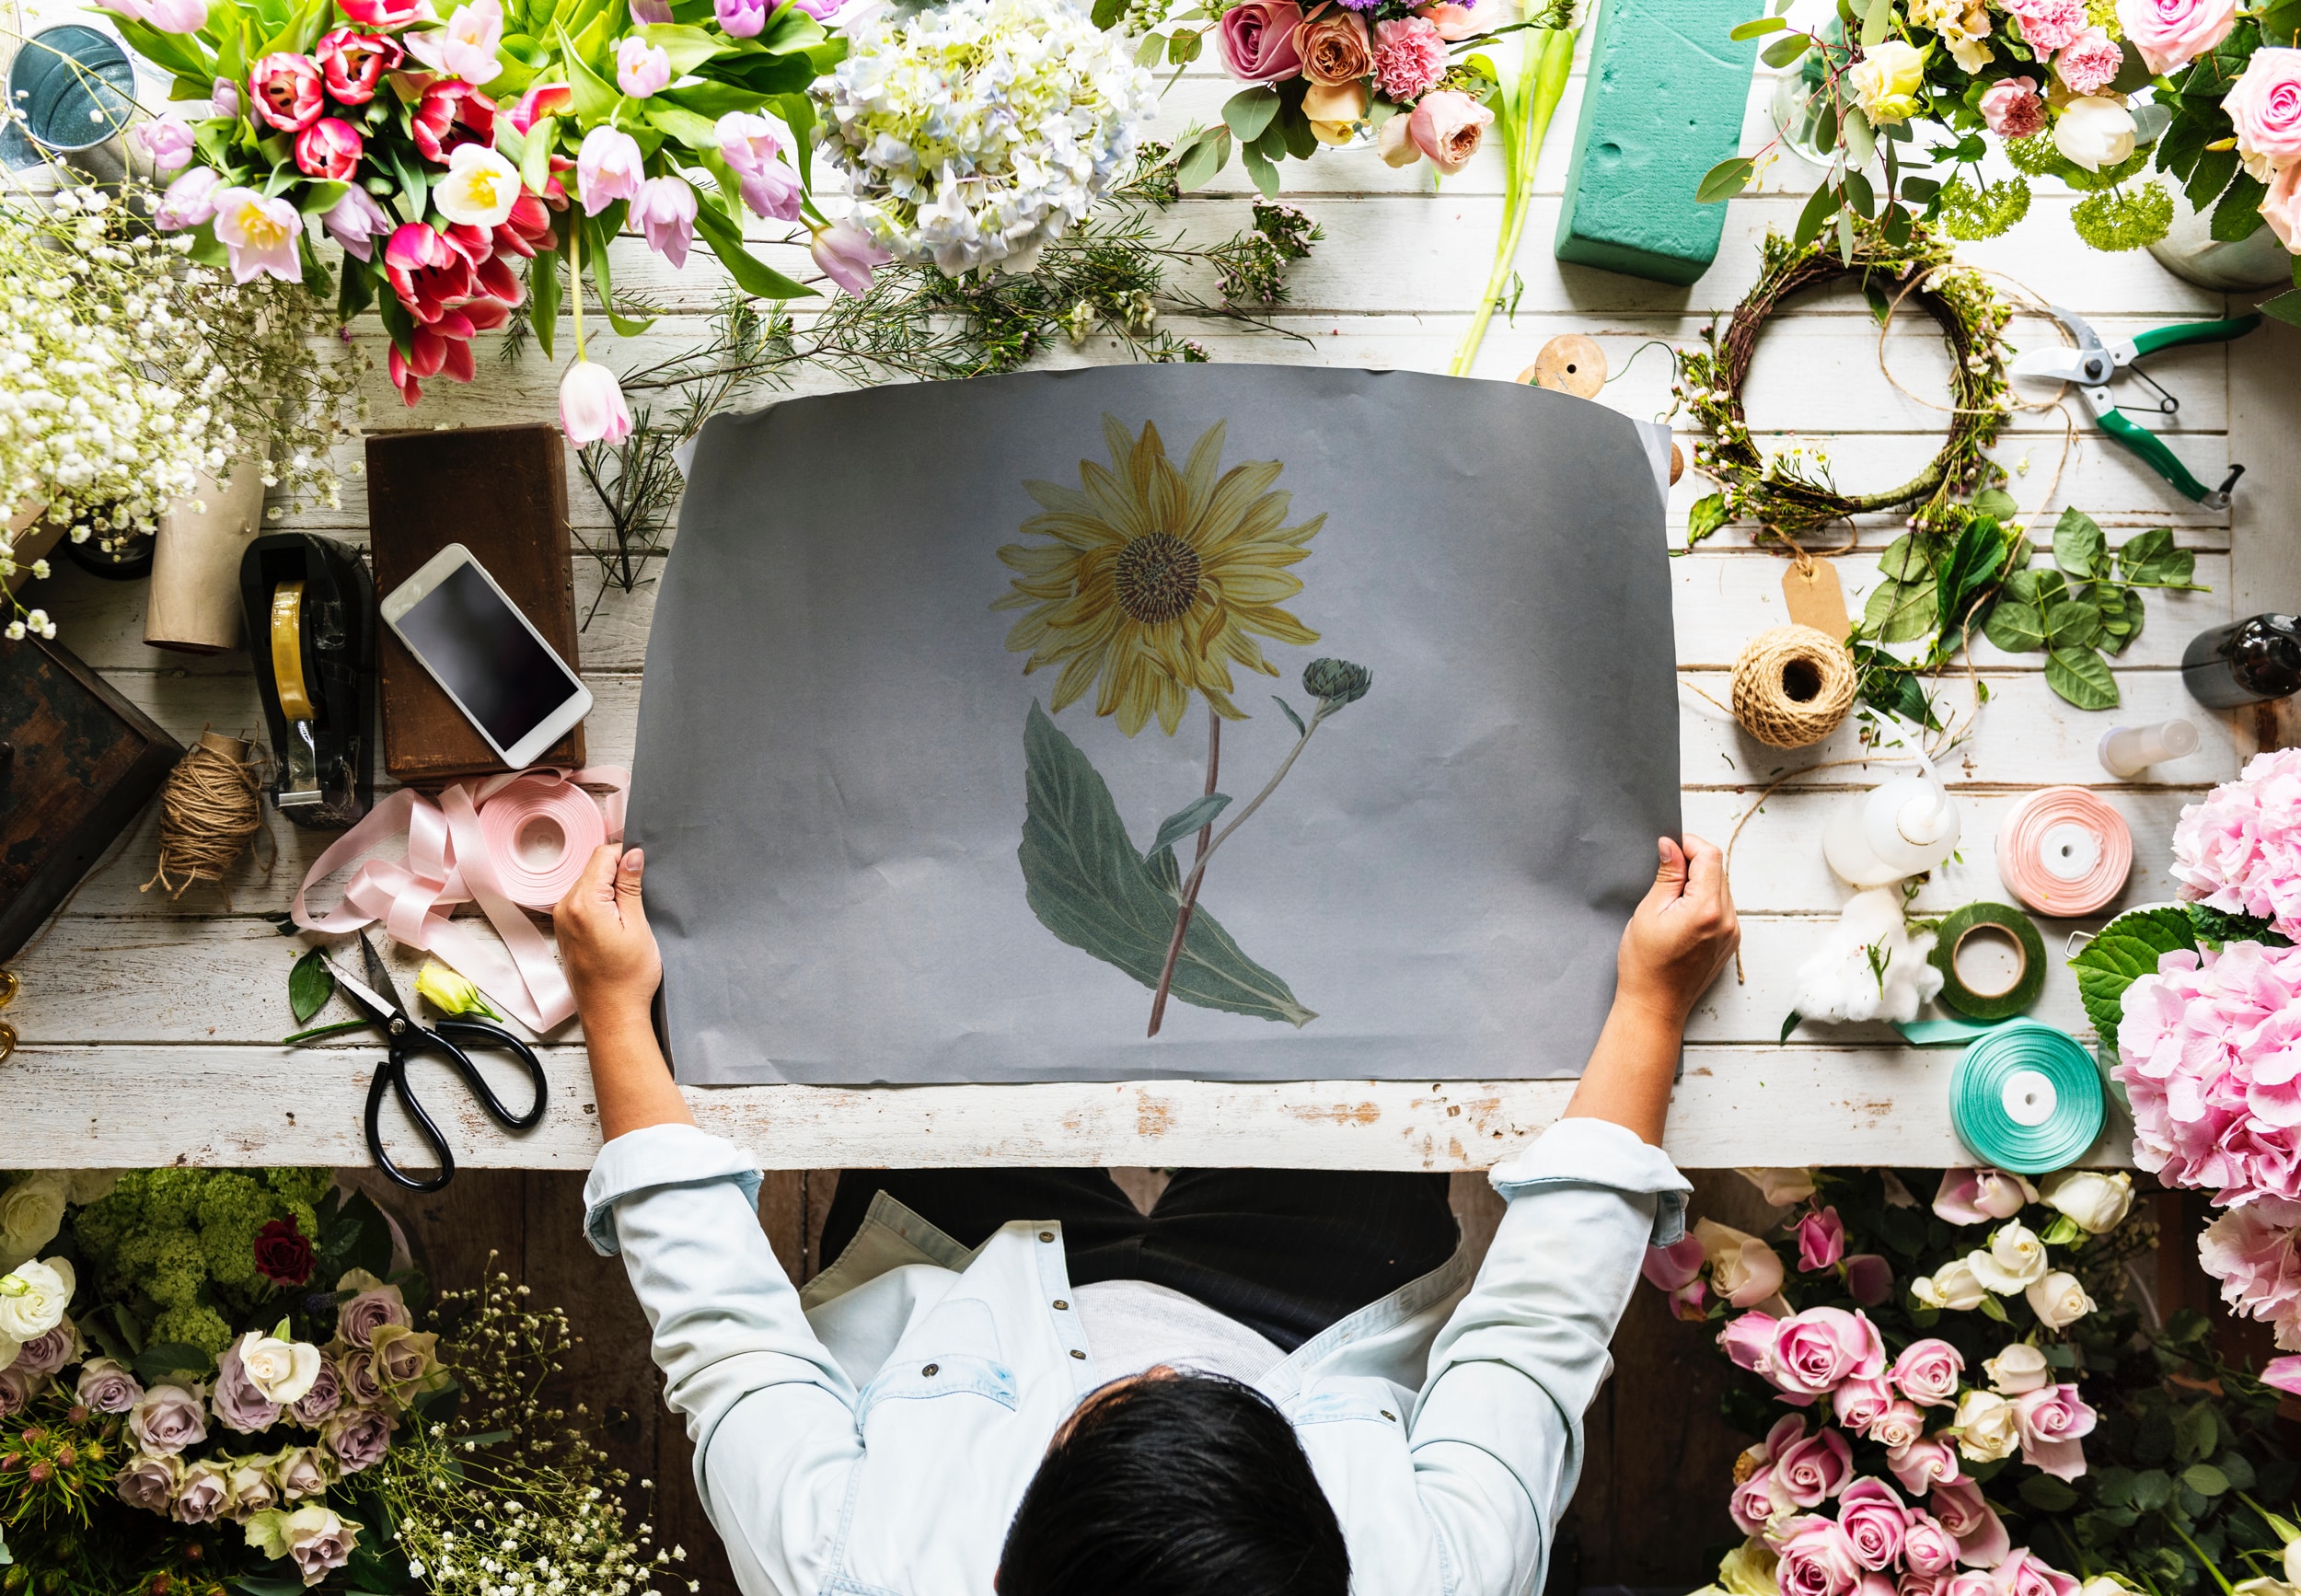 an areil view of a person at a desk holding a painting of a sunflower